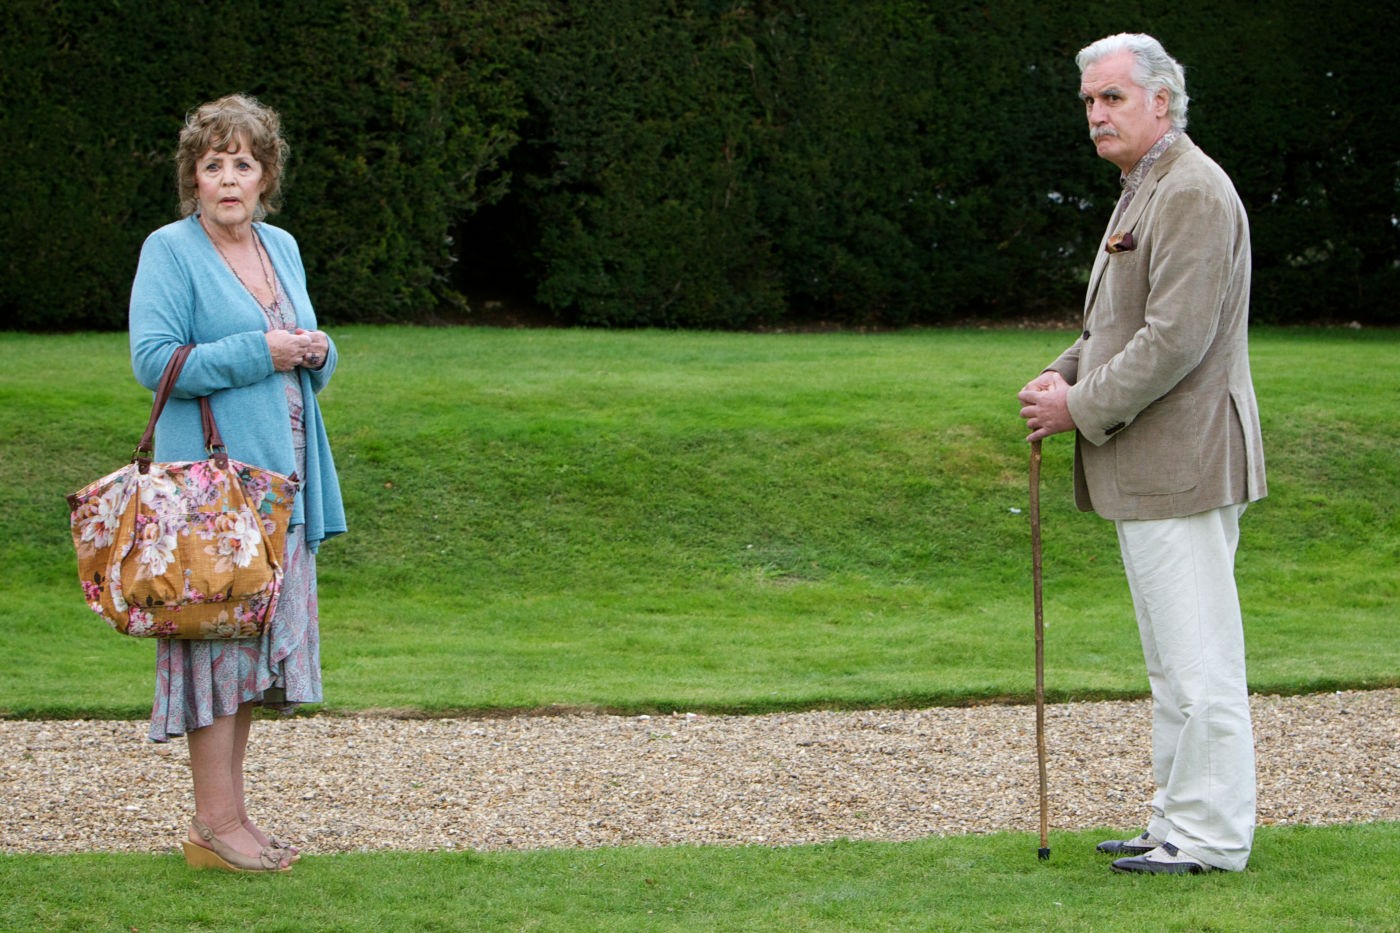 Pauline Collins stars as Cissy Robson and Billy Connolly stars as Wilf Bond in The Weinstein Company's Quartet (2013). Photo credit by Kerry Brown.